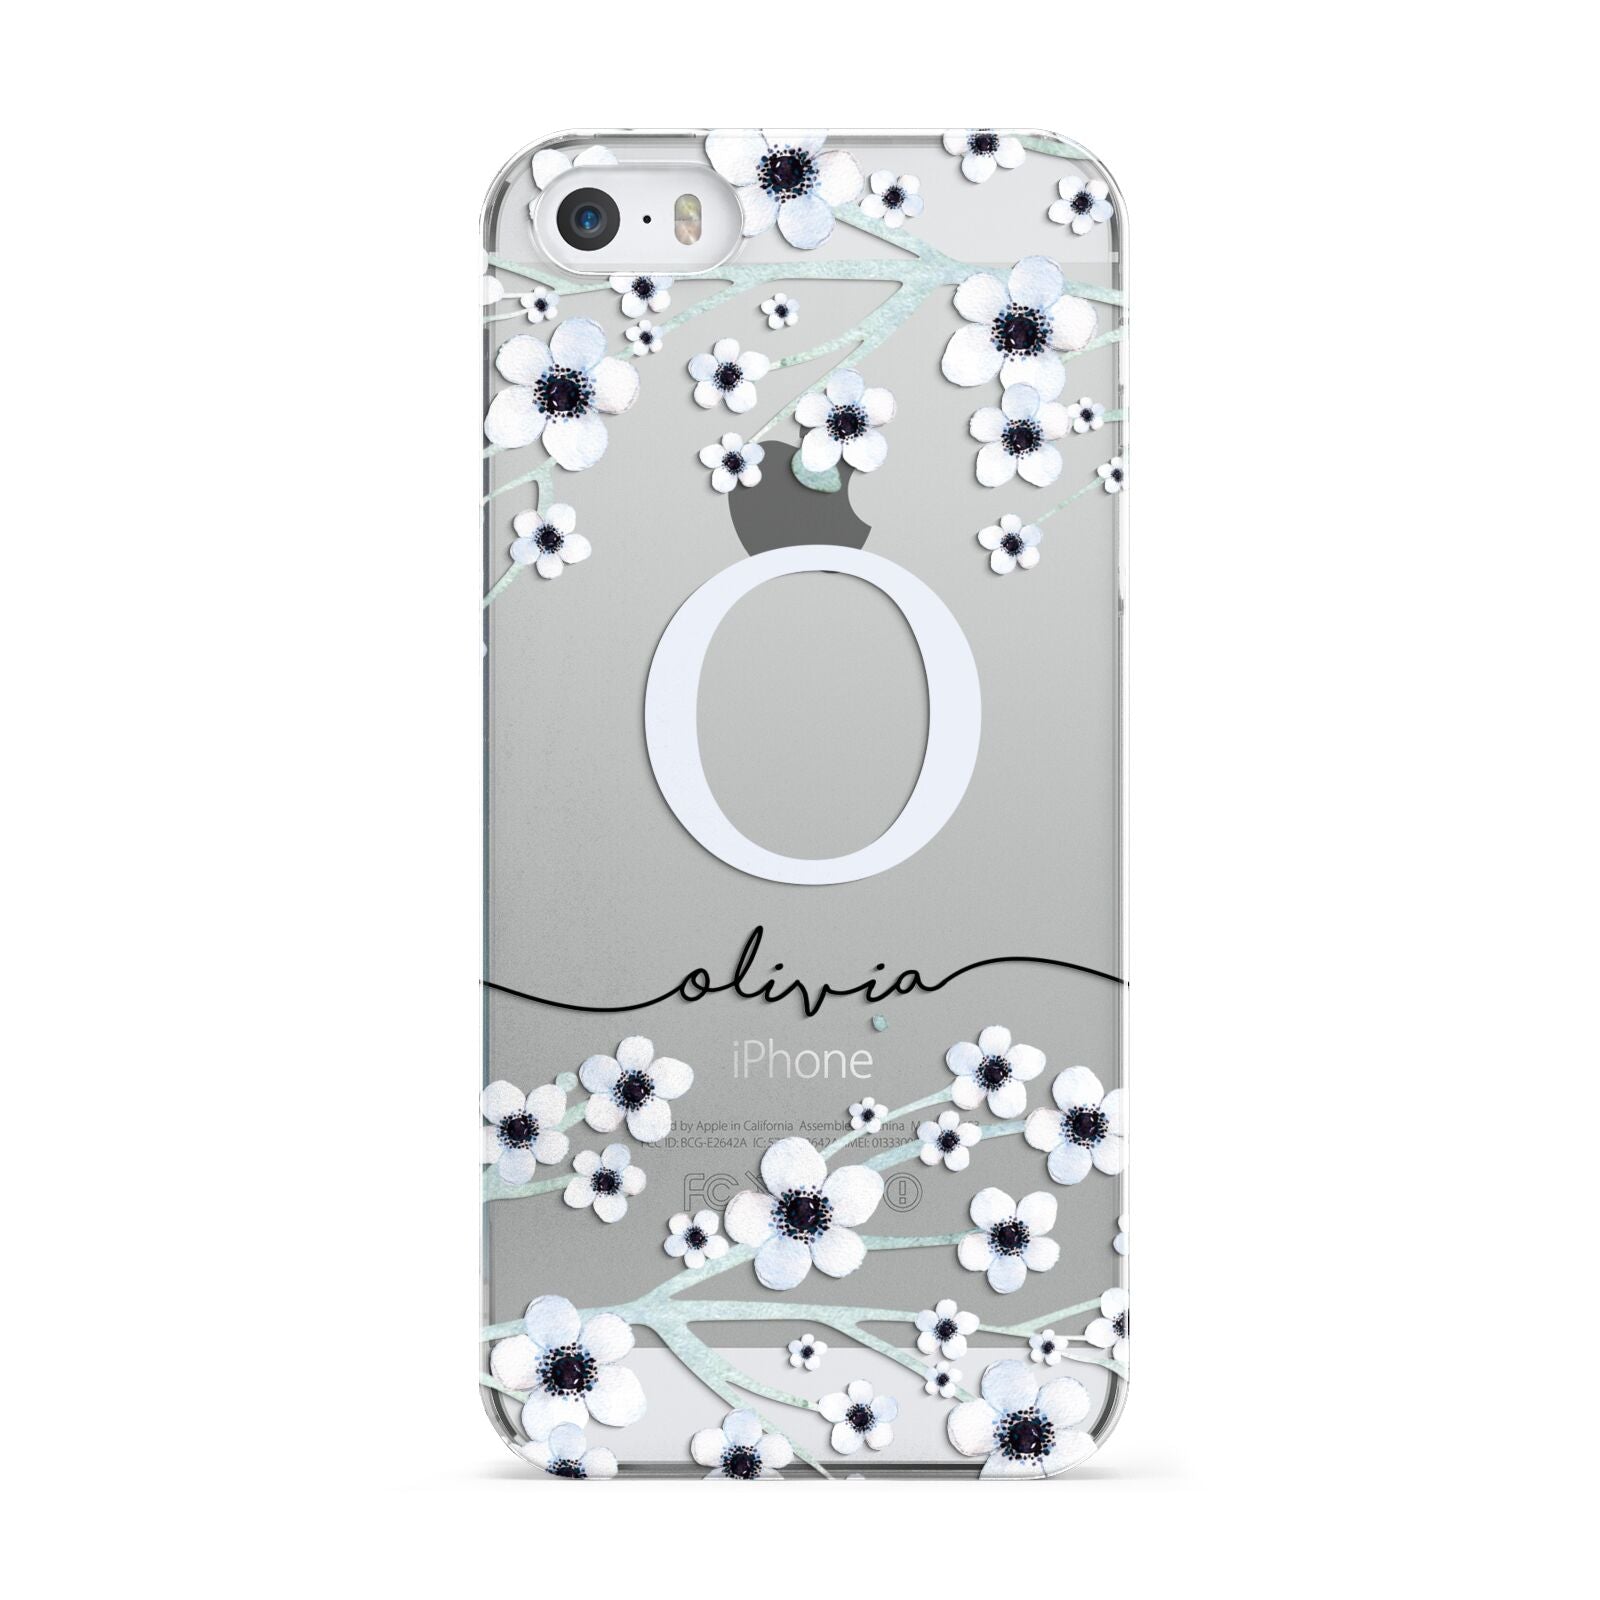 Personalised White Flower Apple iPhone 5 Case